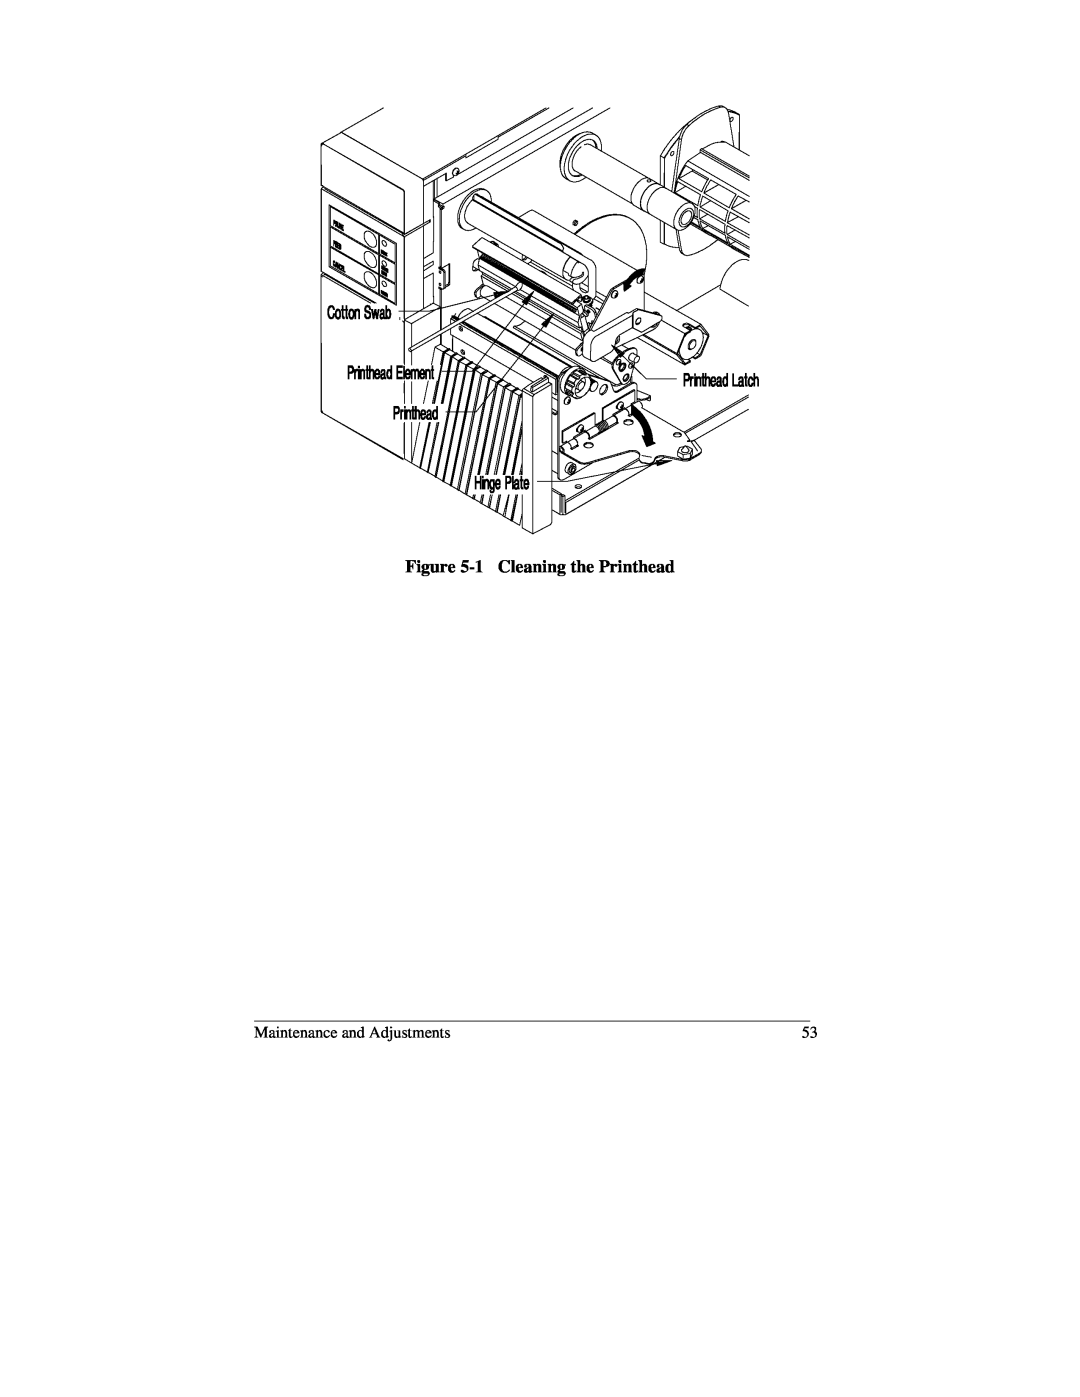 Brady 2034, 2024 manual 1 Cleaning the Printhead, Maintenance and Adjustments 